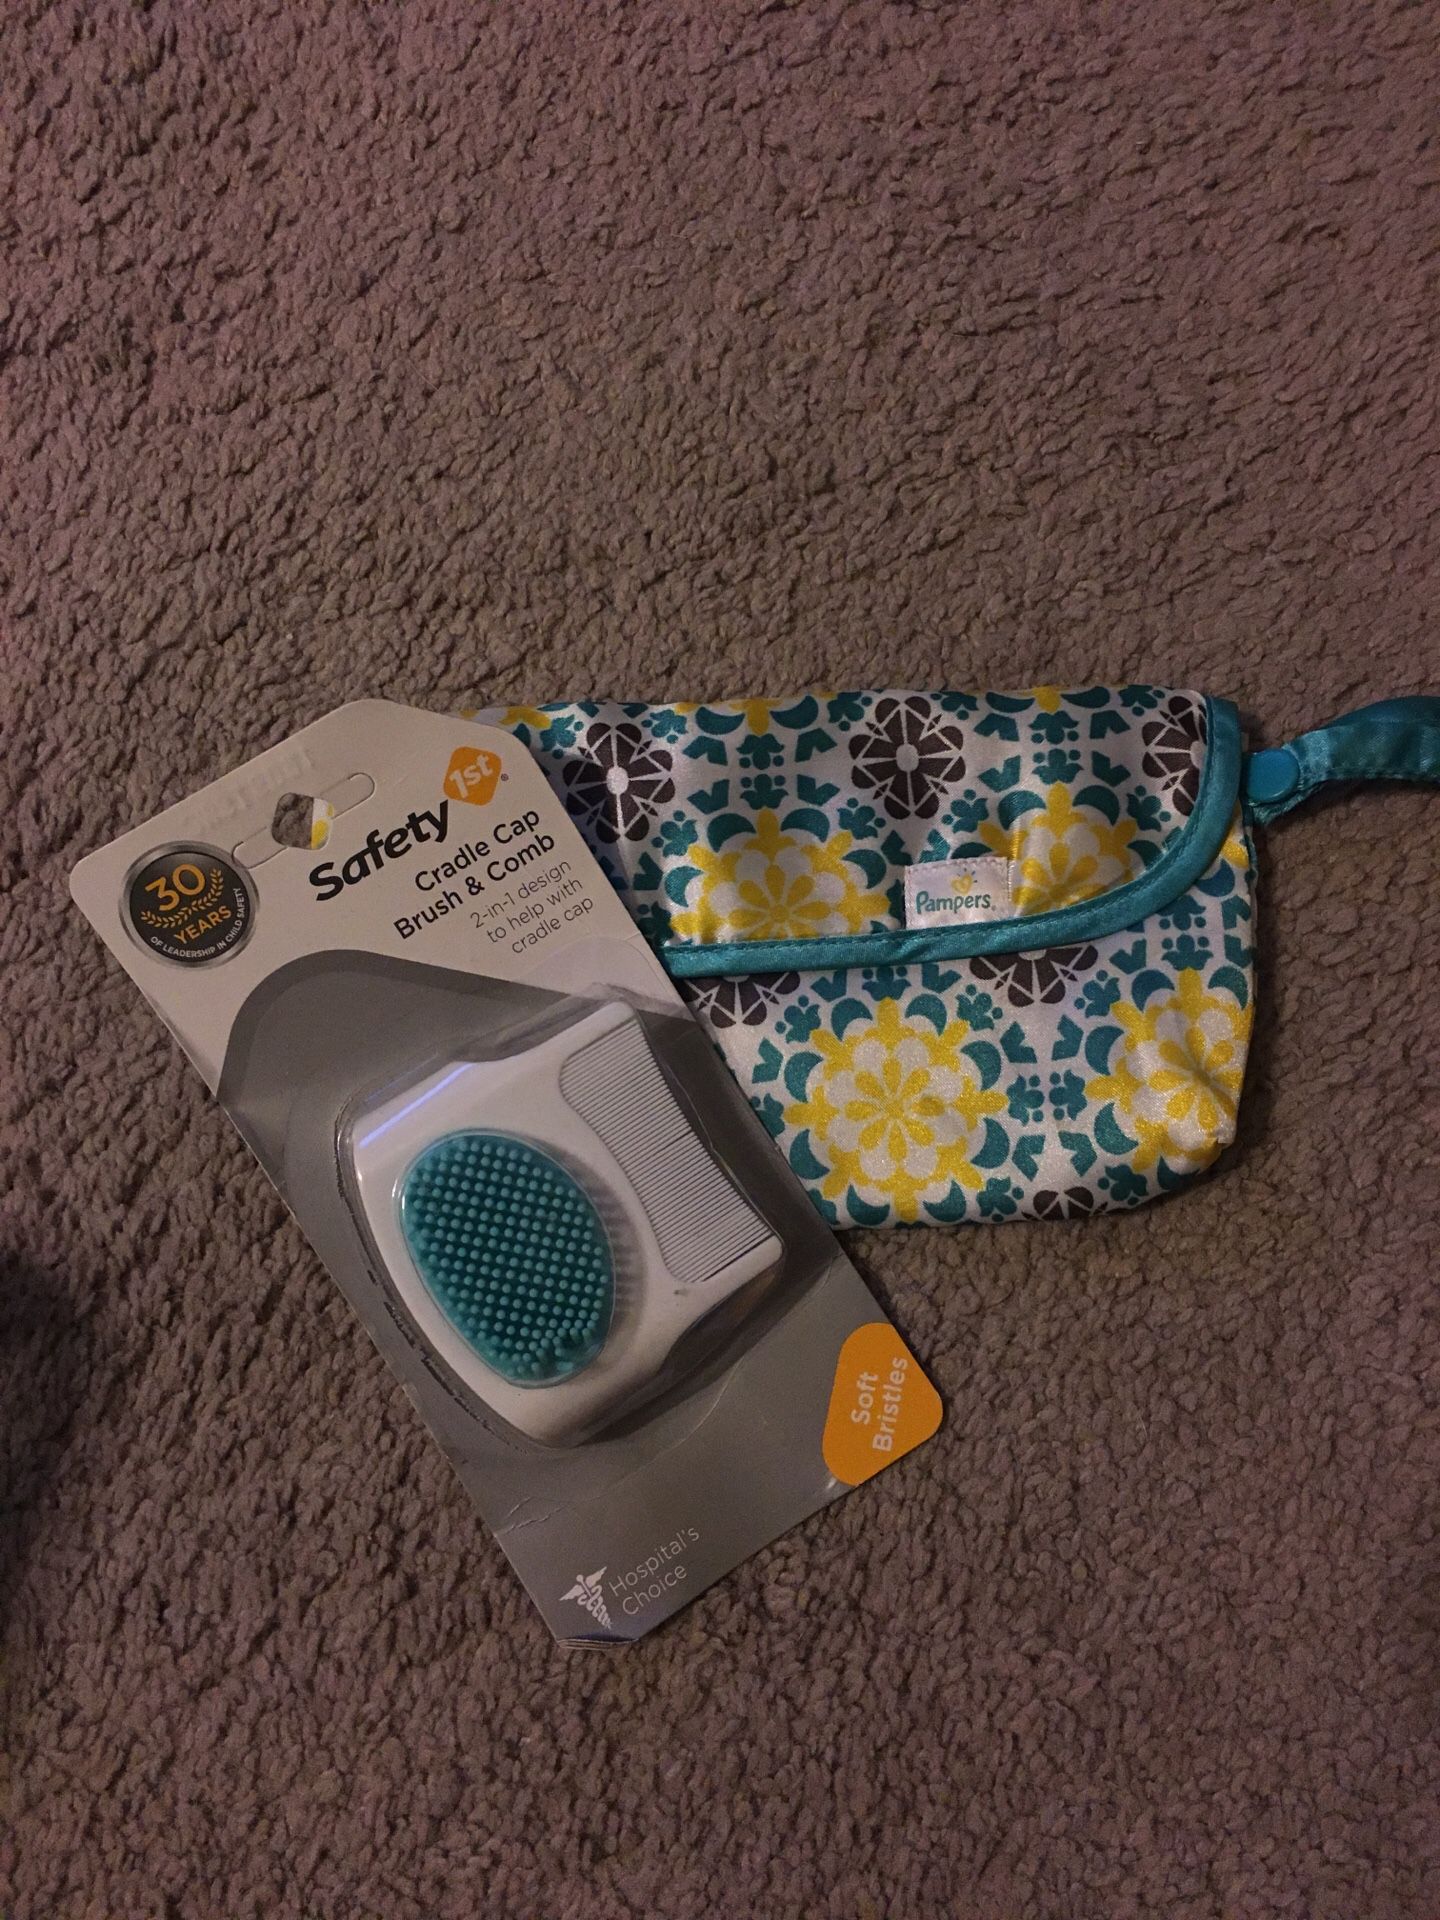 Safety 1st cradle cap brush and comb and Pampers small pouch